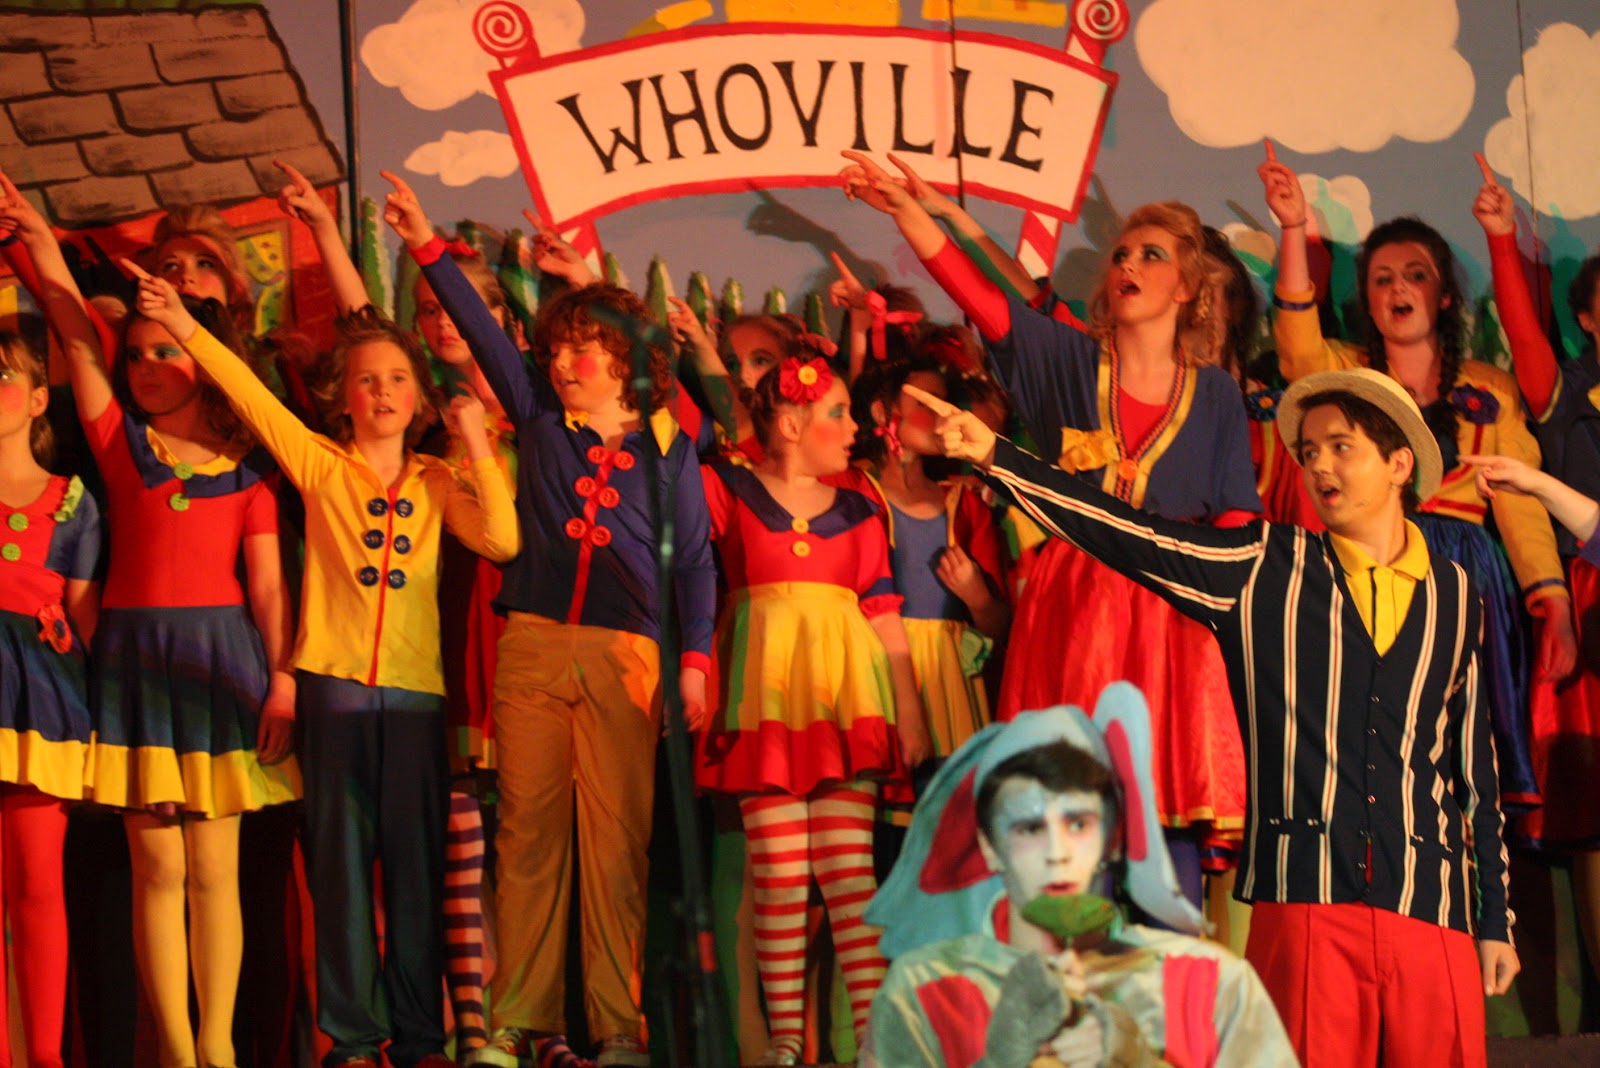 Whoville Costumes